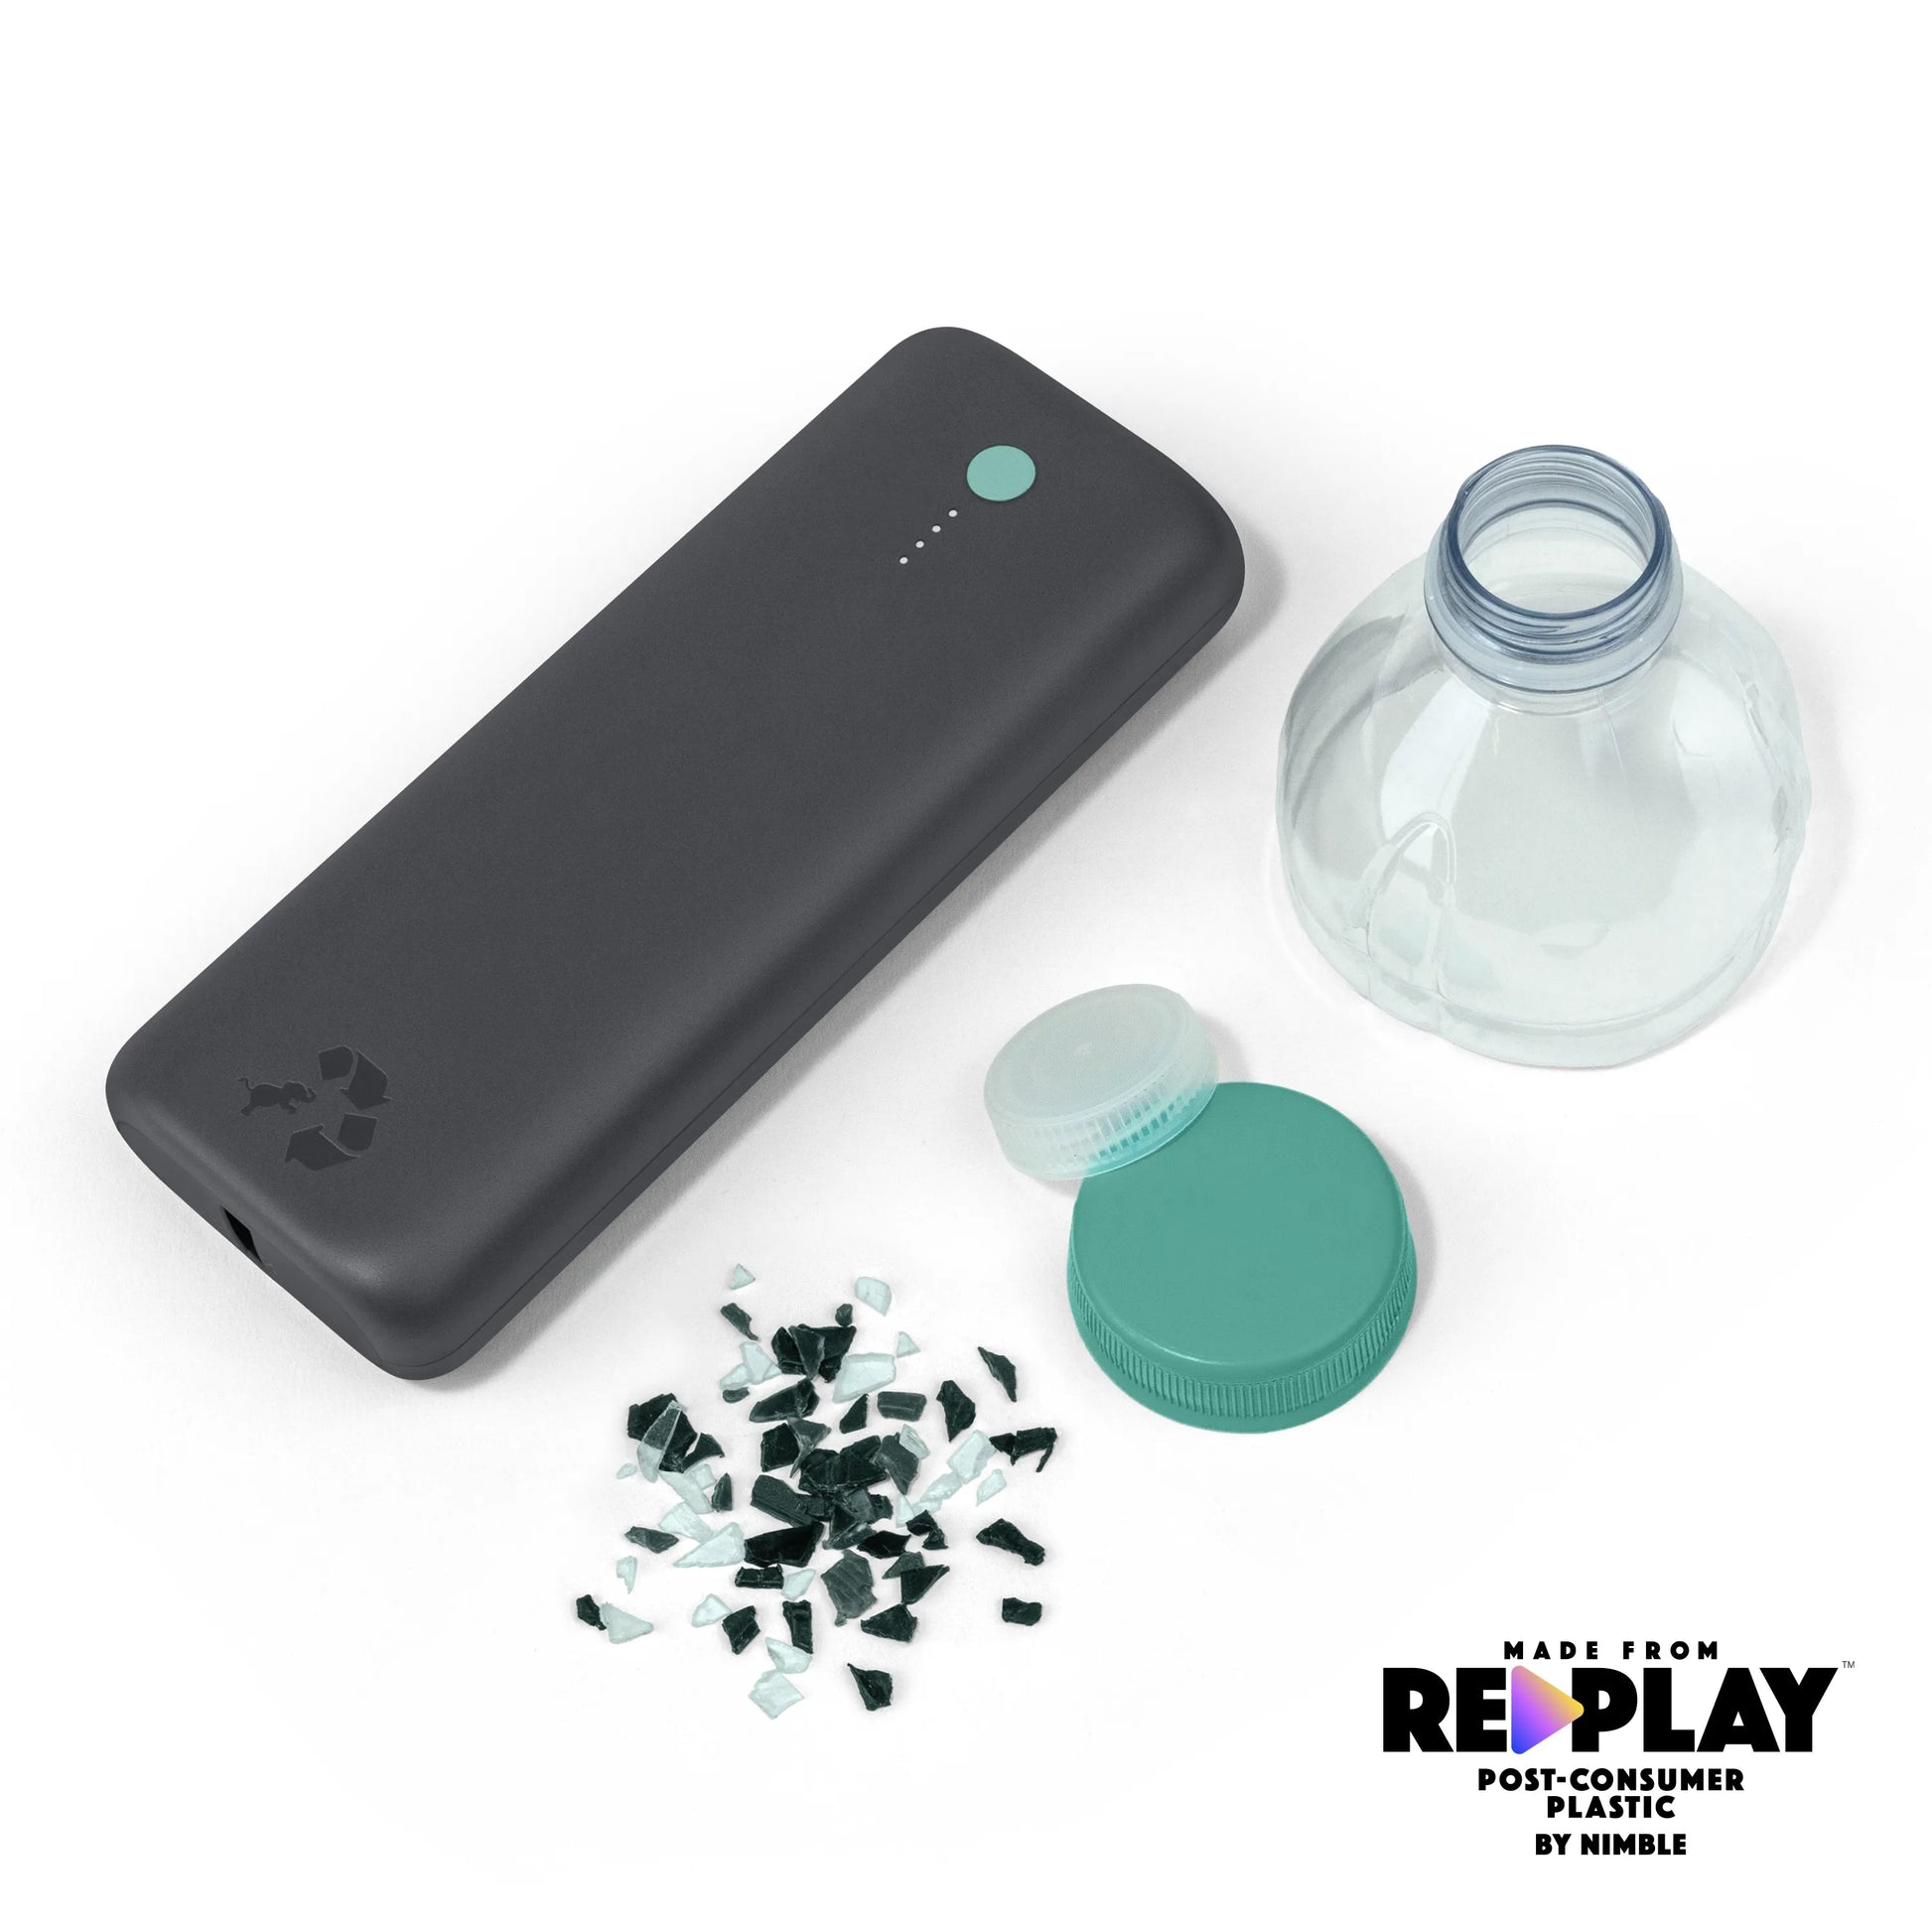 Large dark gray portable charger with green button next to bottle caps and shredded plastic.